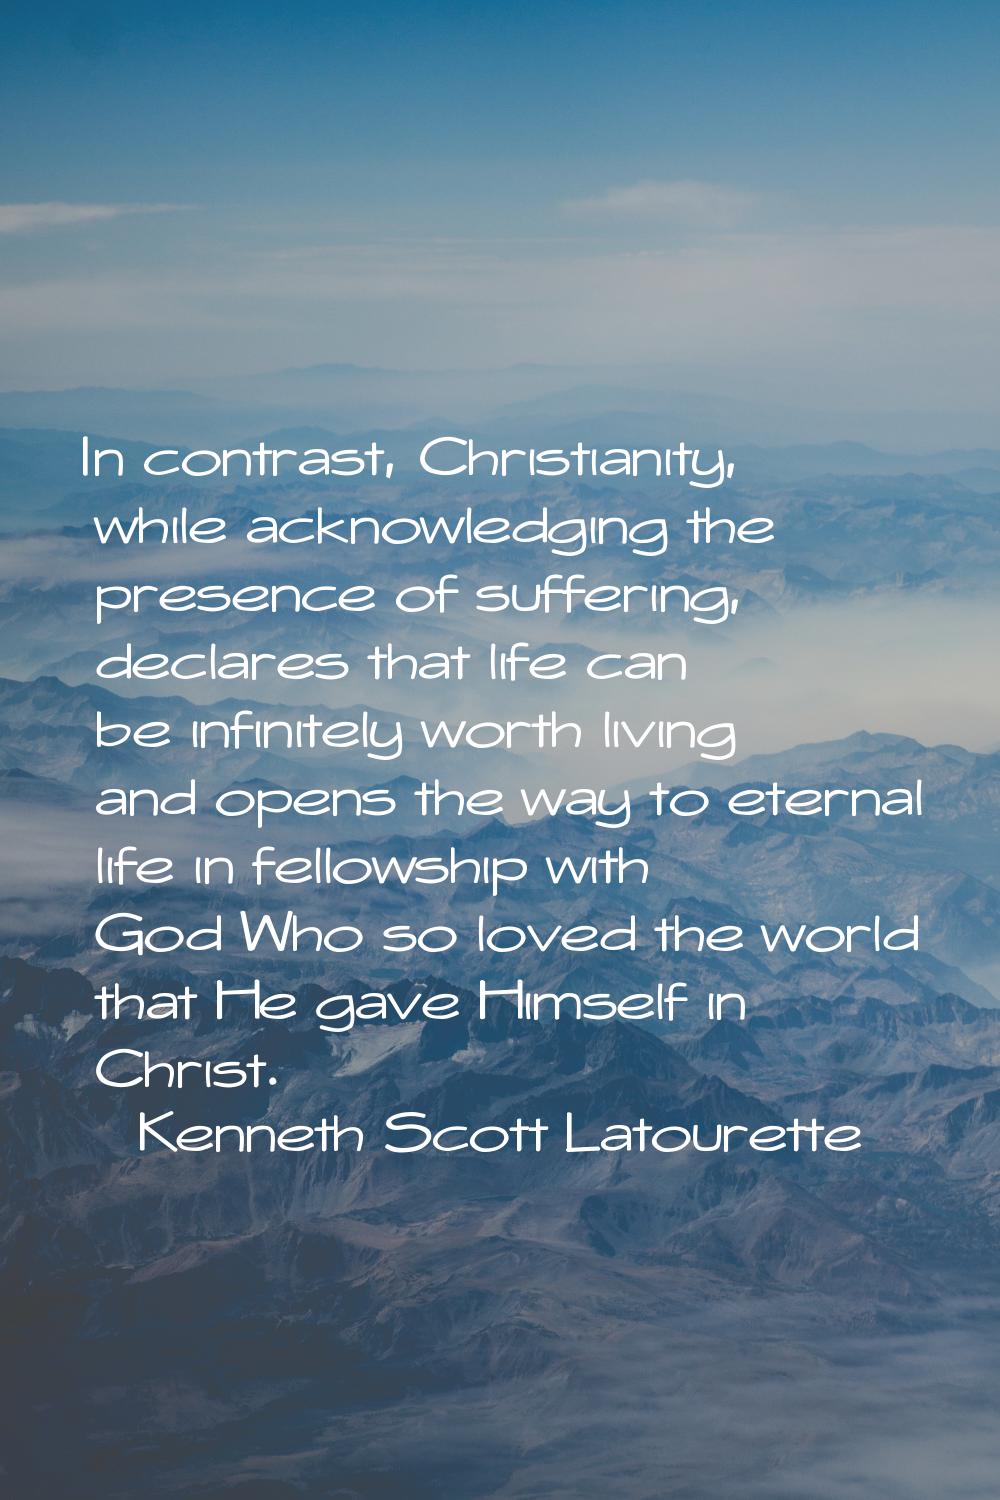 In contrast, Christianity, while acknowledging the presence of suffering, declares that life can be